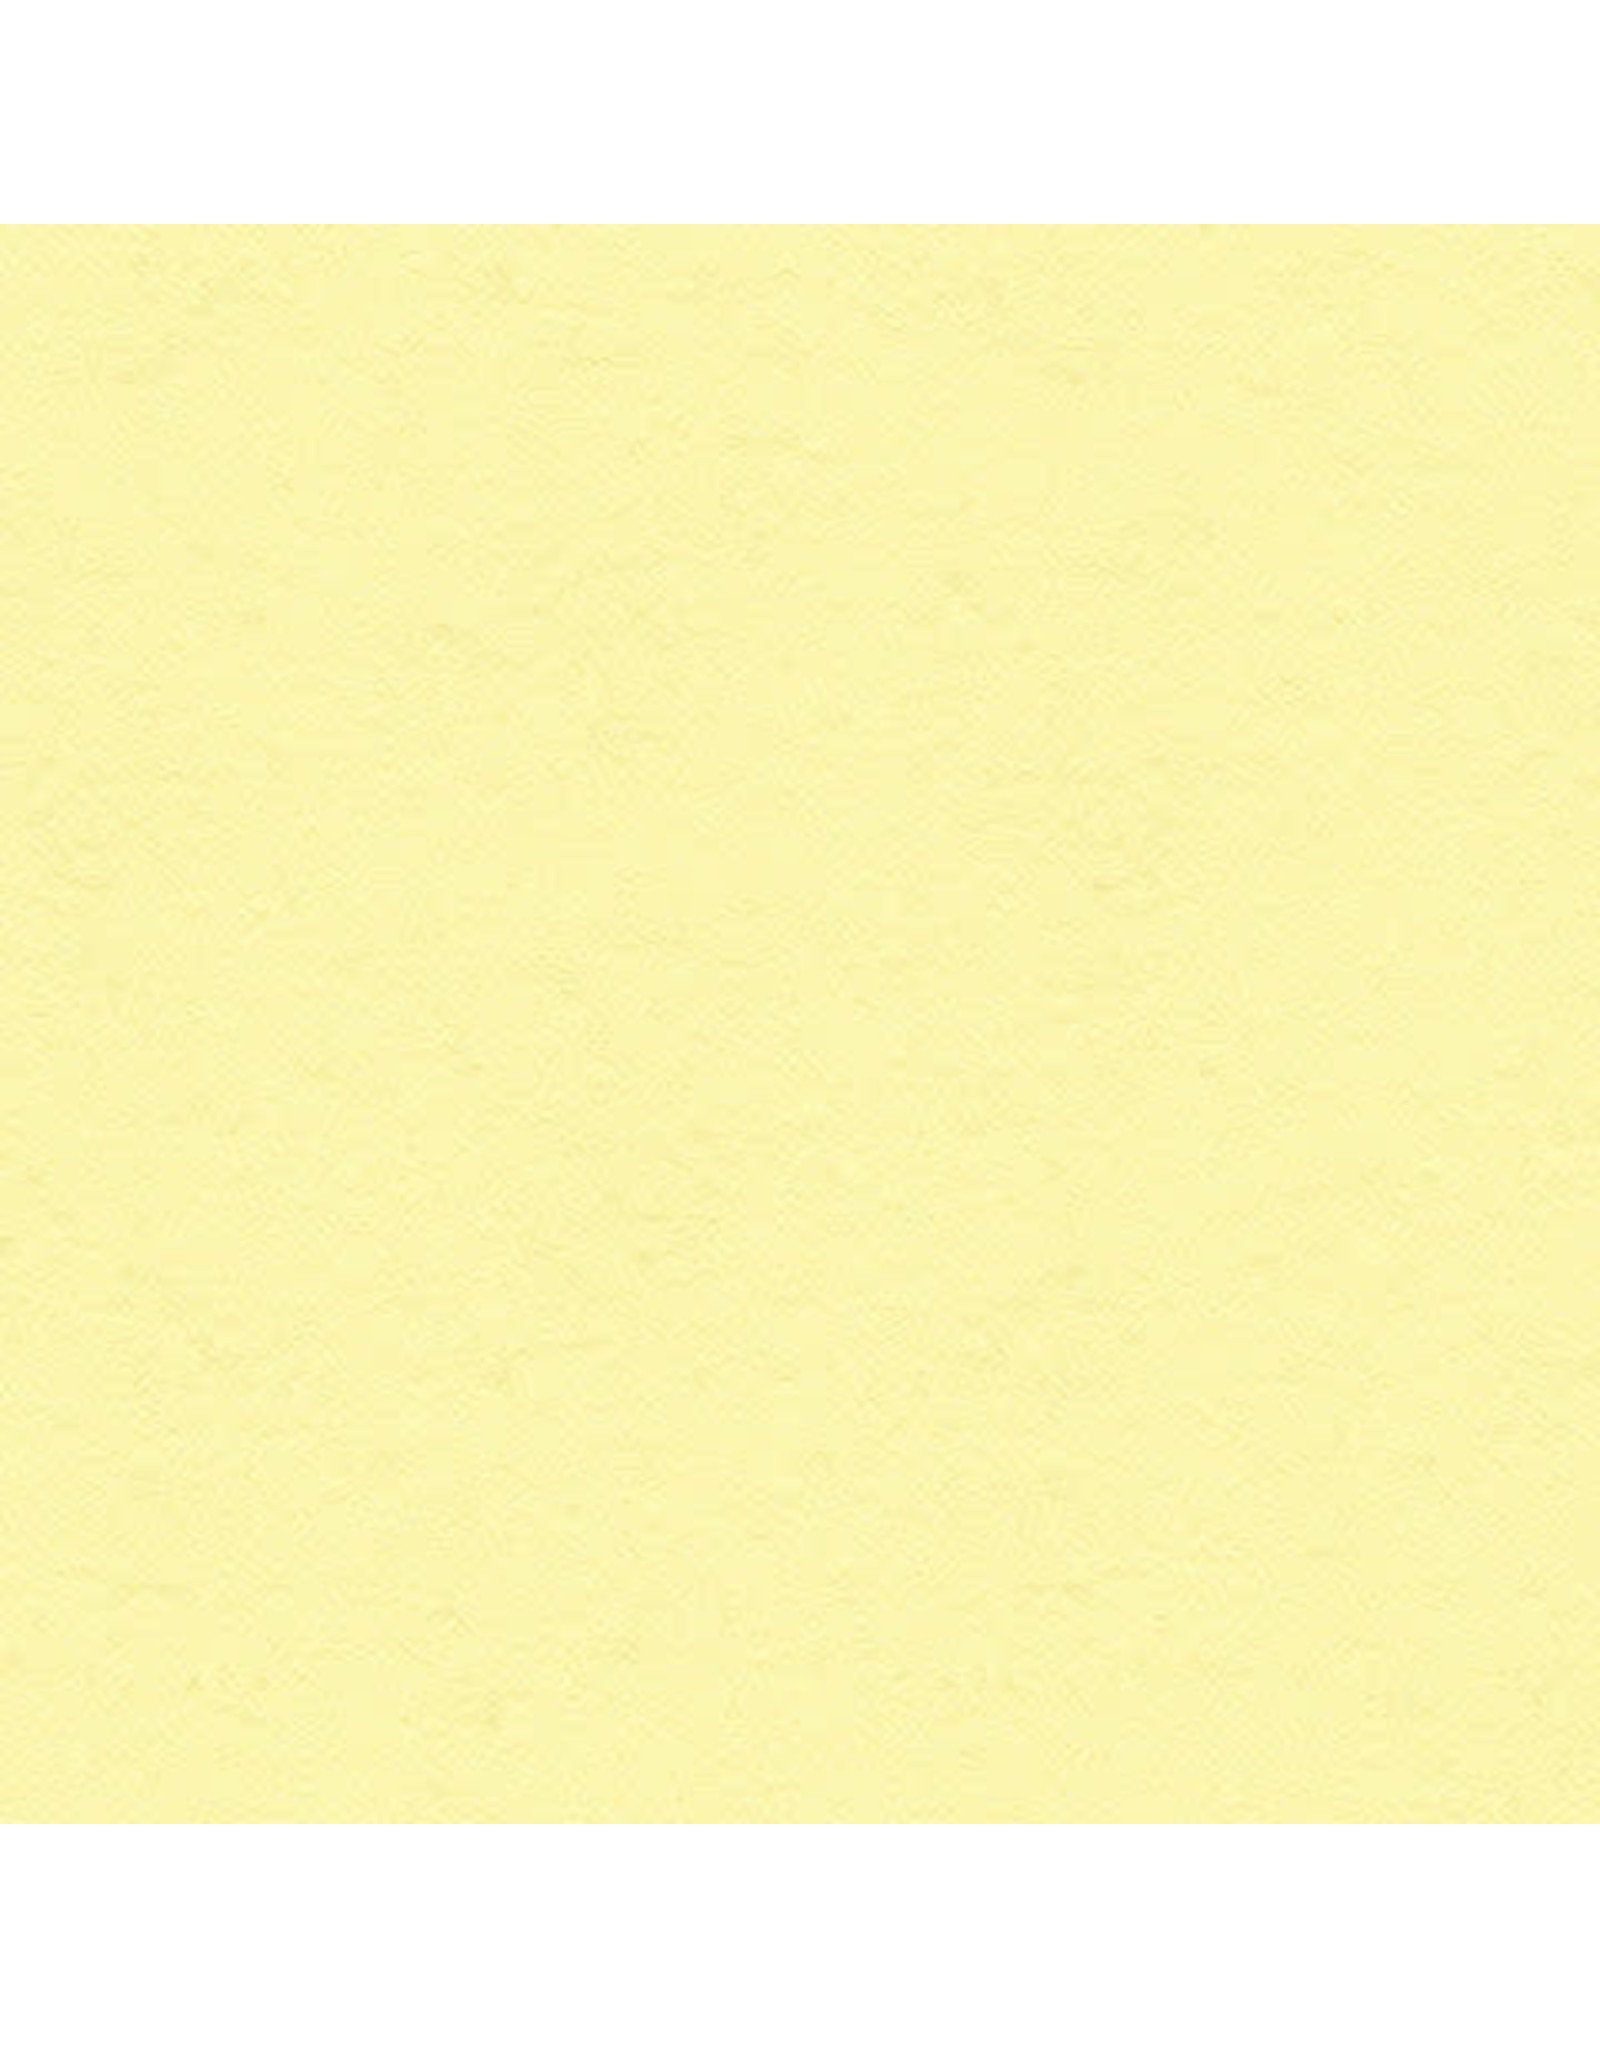 My Colors 8.5x11 Yellow   -Classic Cardstock